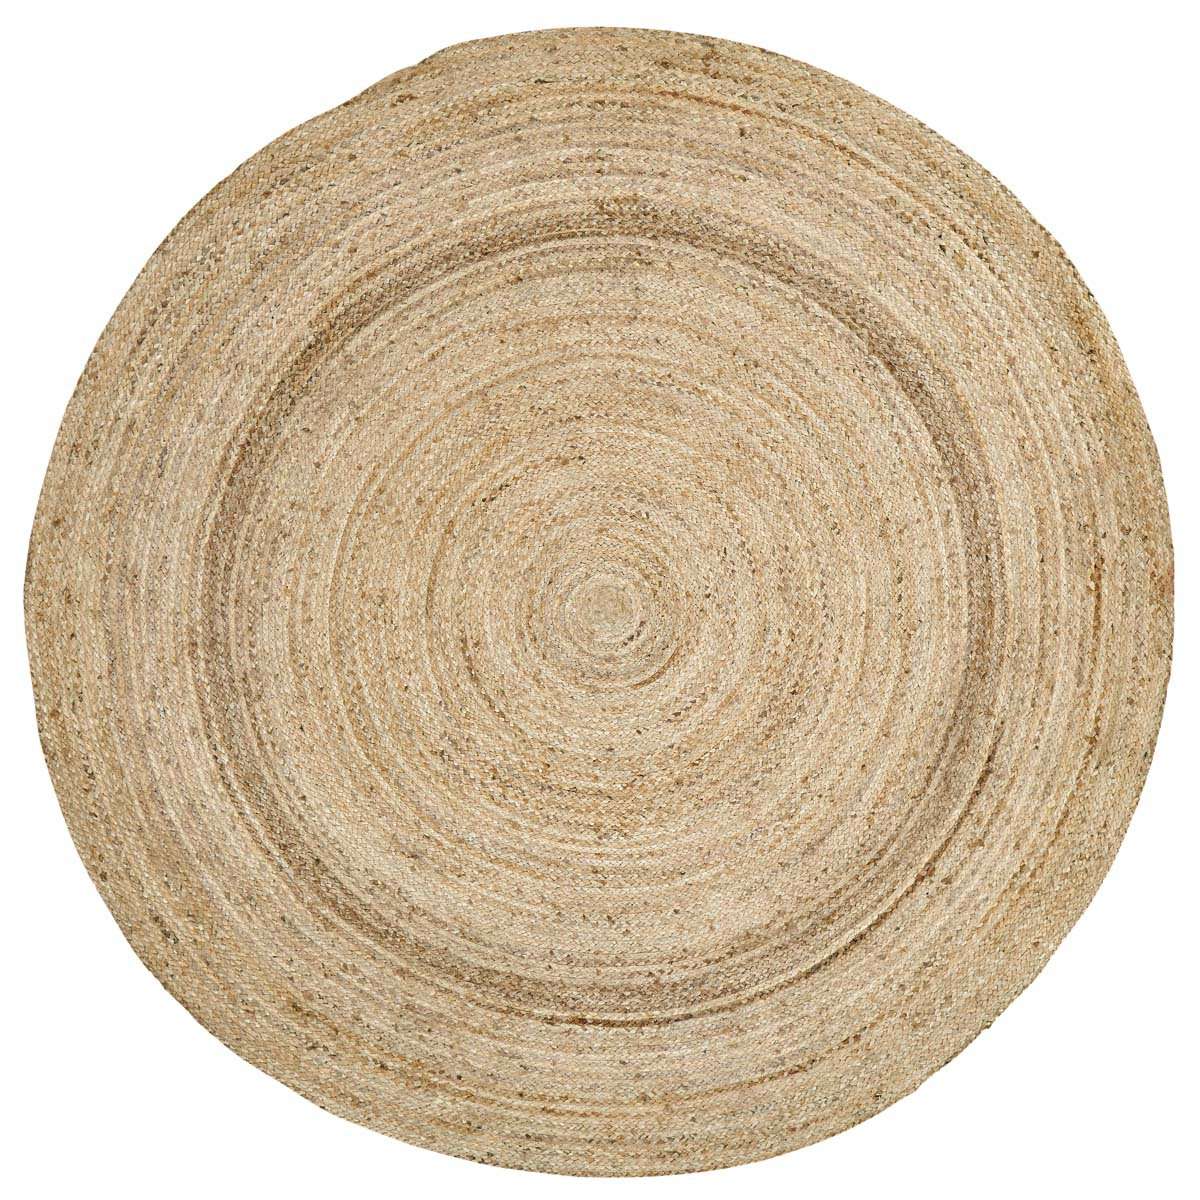 Harlow Jute Braided Round Rugs VHC Brands Rugs VHC Brands 8' FT 